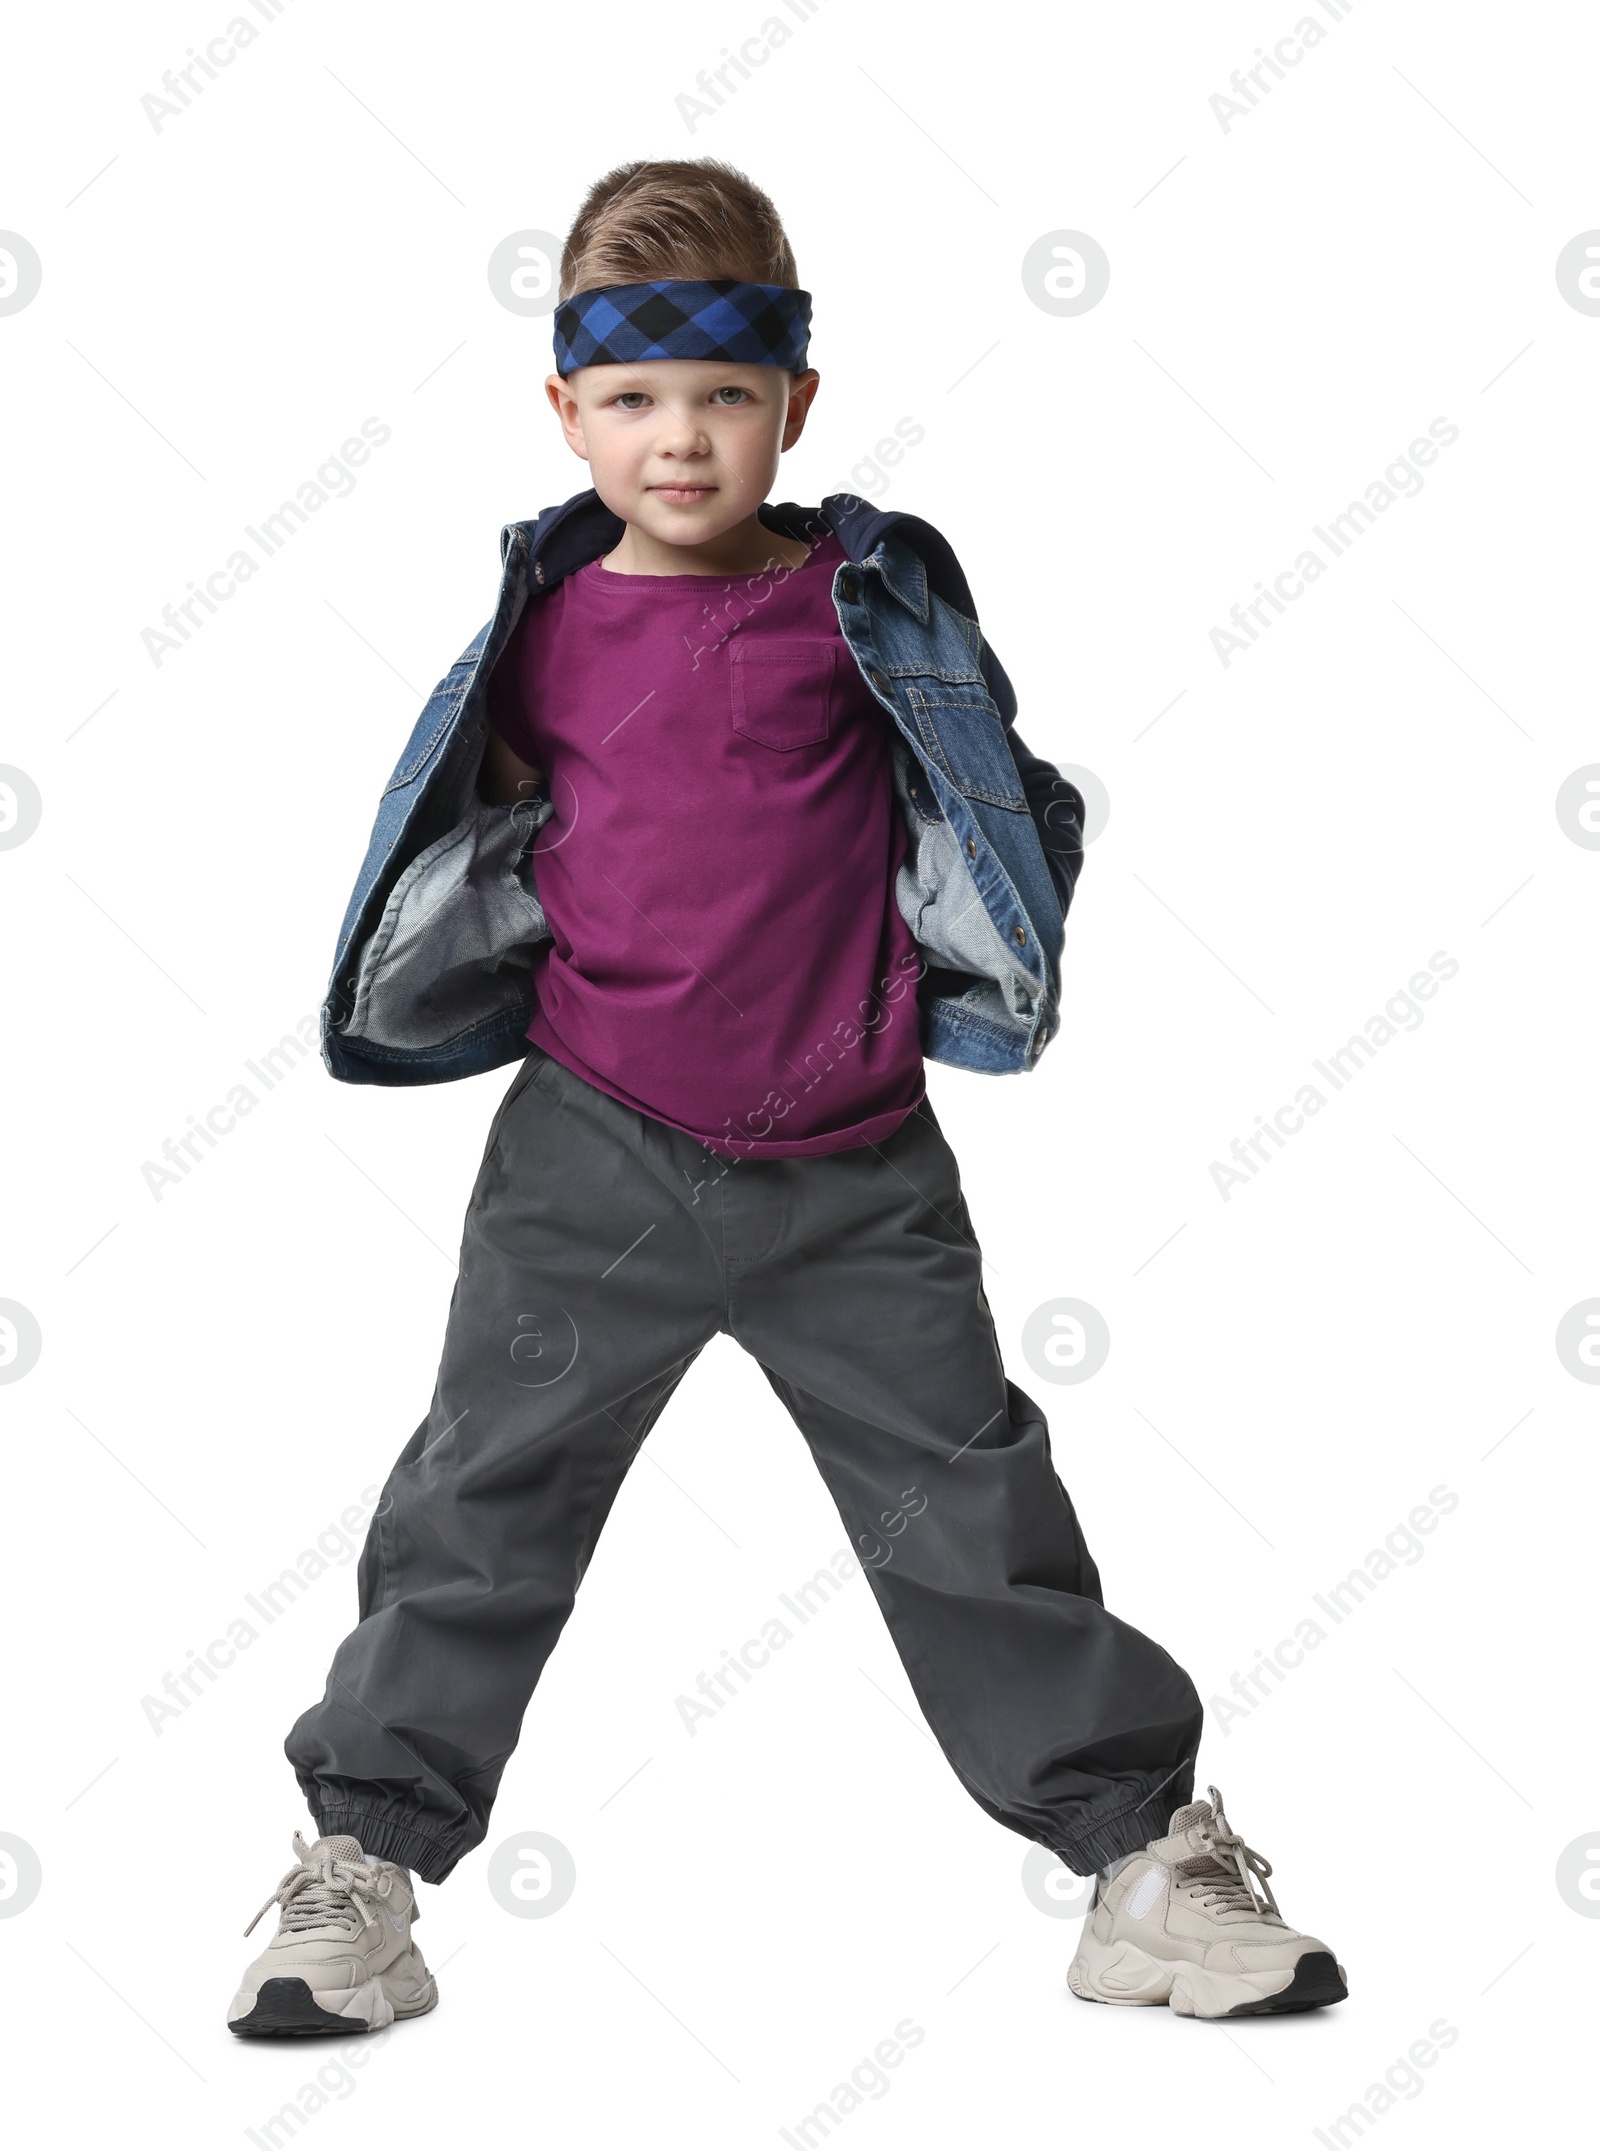 Photo of Happy little boy dancing on white background